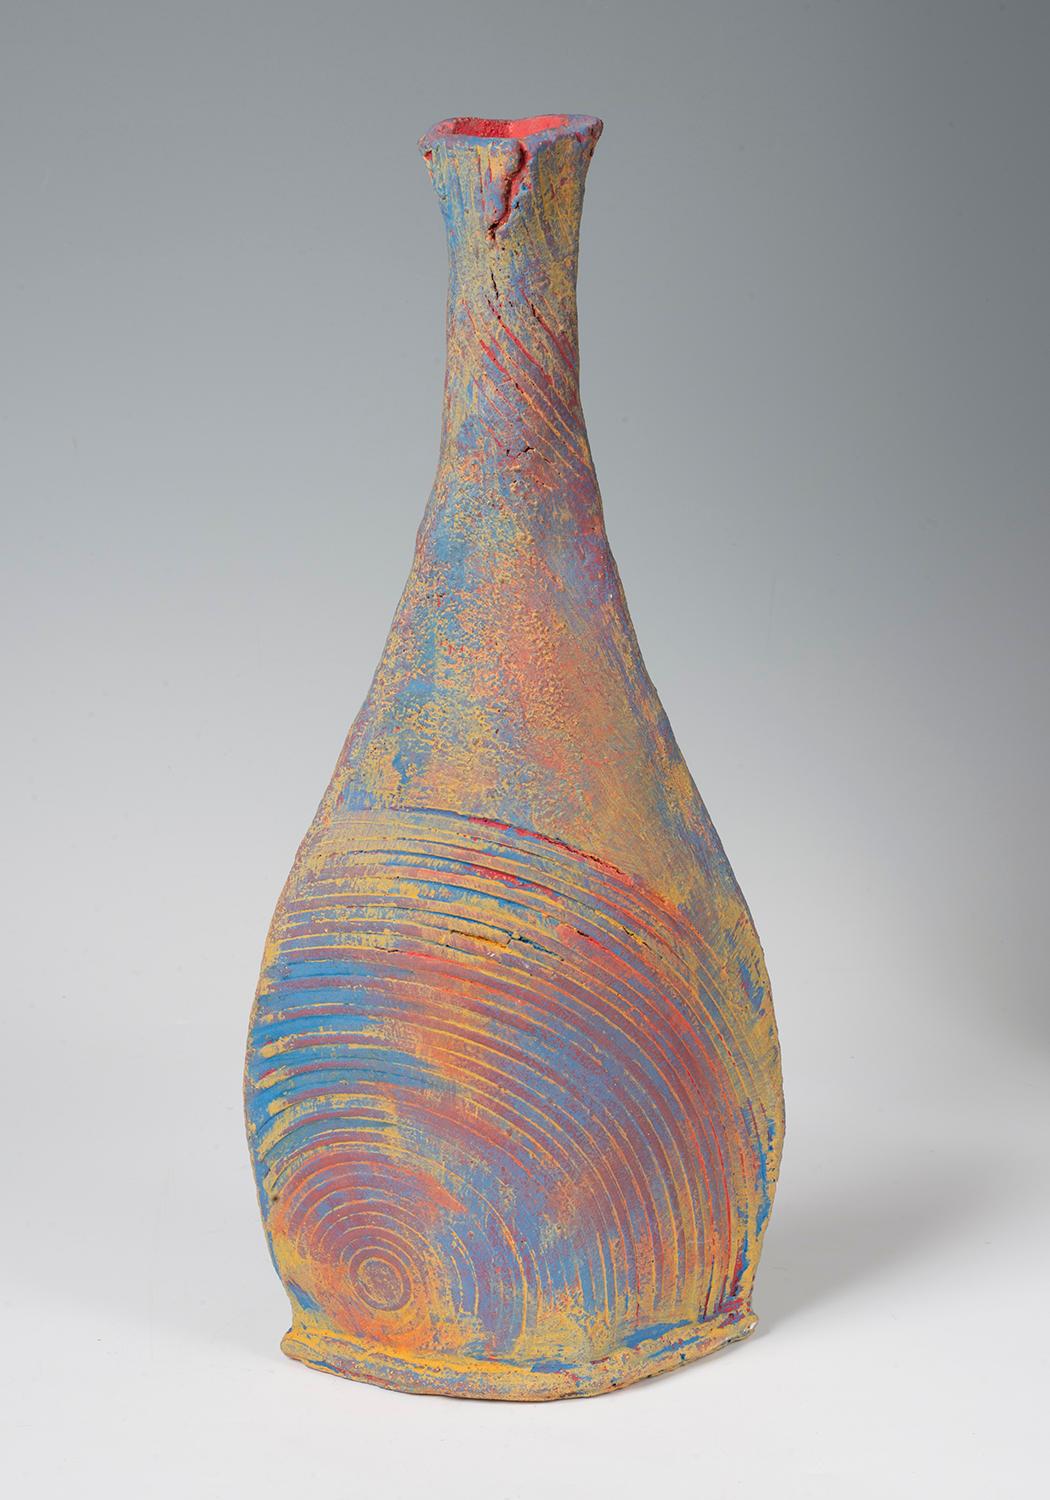 Untitled- Ceramic Vessel with Pastel tones by Marc Cohen